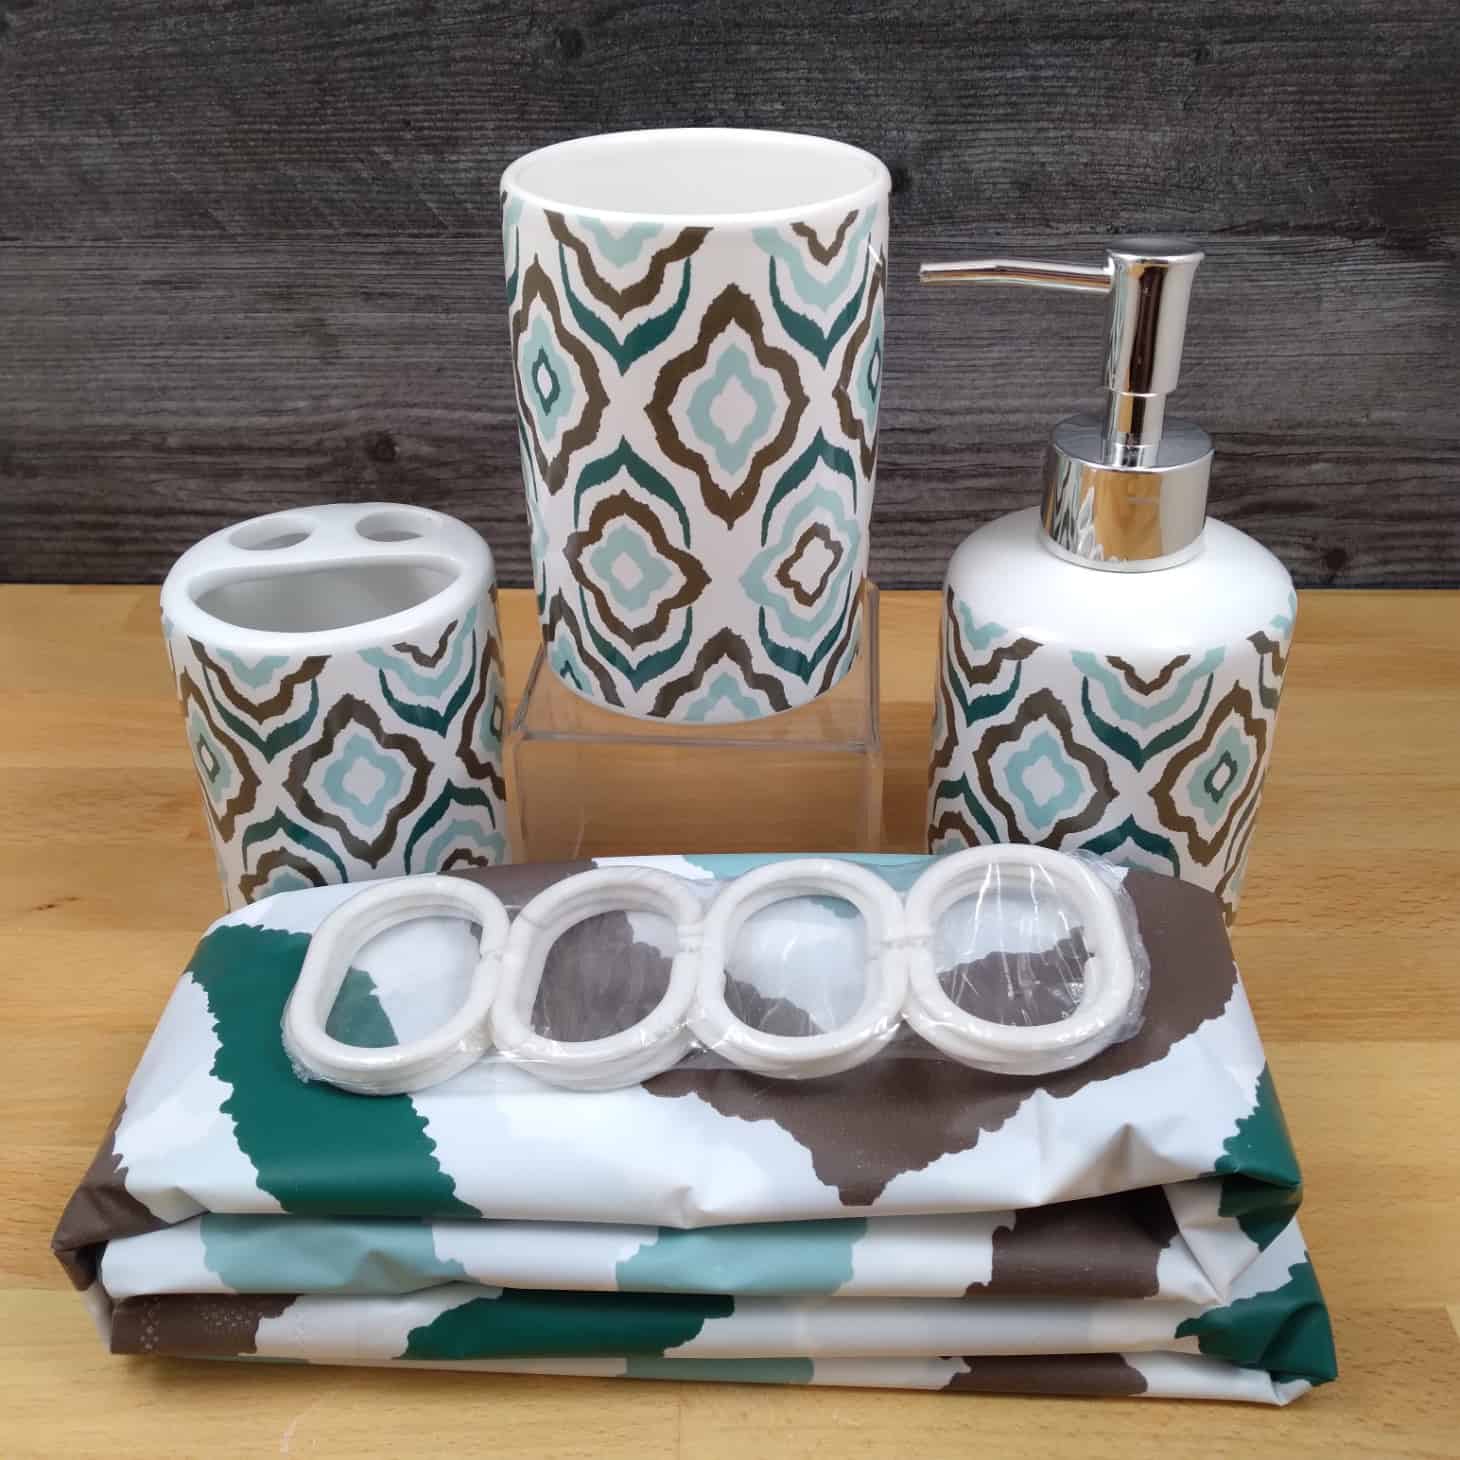 This Bathroom Set Multi Color Design Toothbrush Holder Soap Dispenser Shower Curtain is made with love by Premier Homegoods! Shop more unique gift ideas today with Spots Initiatives, the best way to support creators.